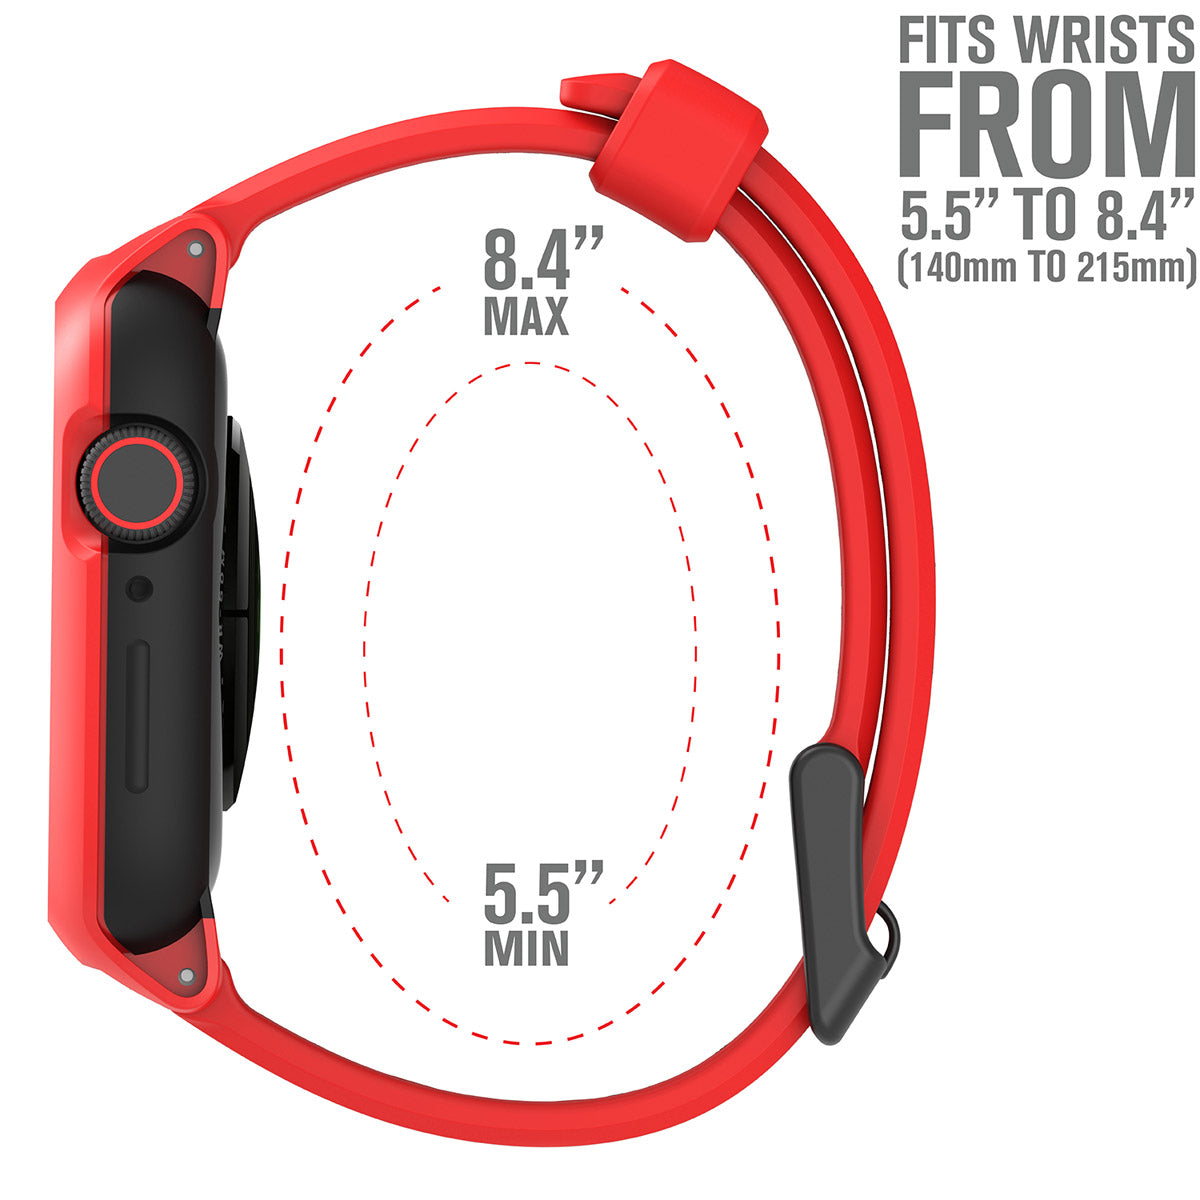 catalyst apple watch series 6 5 4 se gen 21 44mm 40mm impact protection case sport band flame red side view of the catalyst case with the minimum and maximum sizes of the band text reads fits wrists from 5.5" to 8.4"(140mm to 215mm)